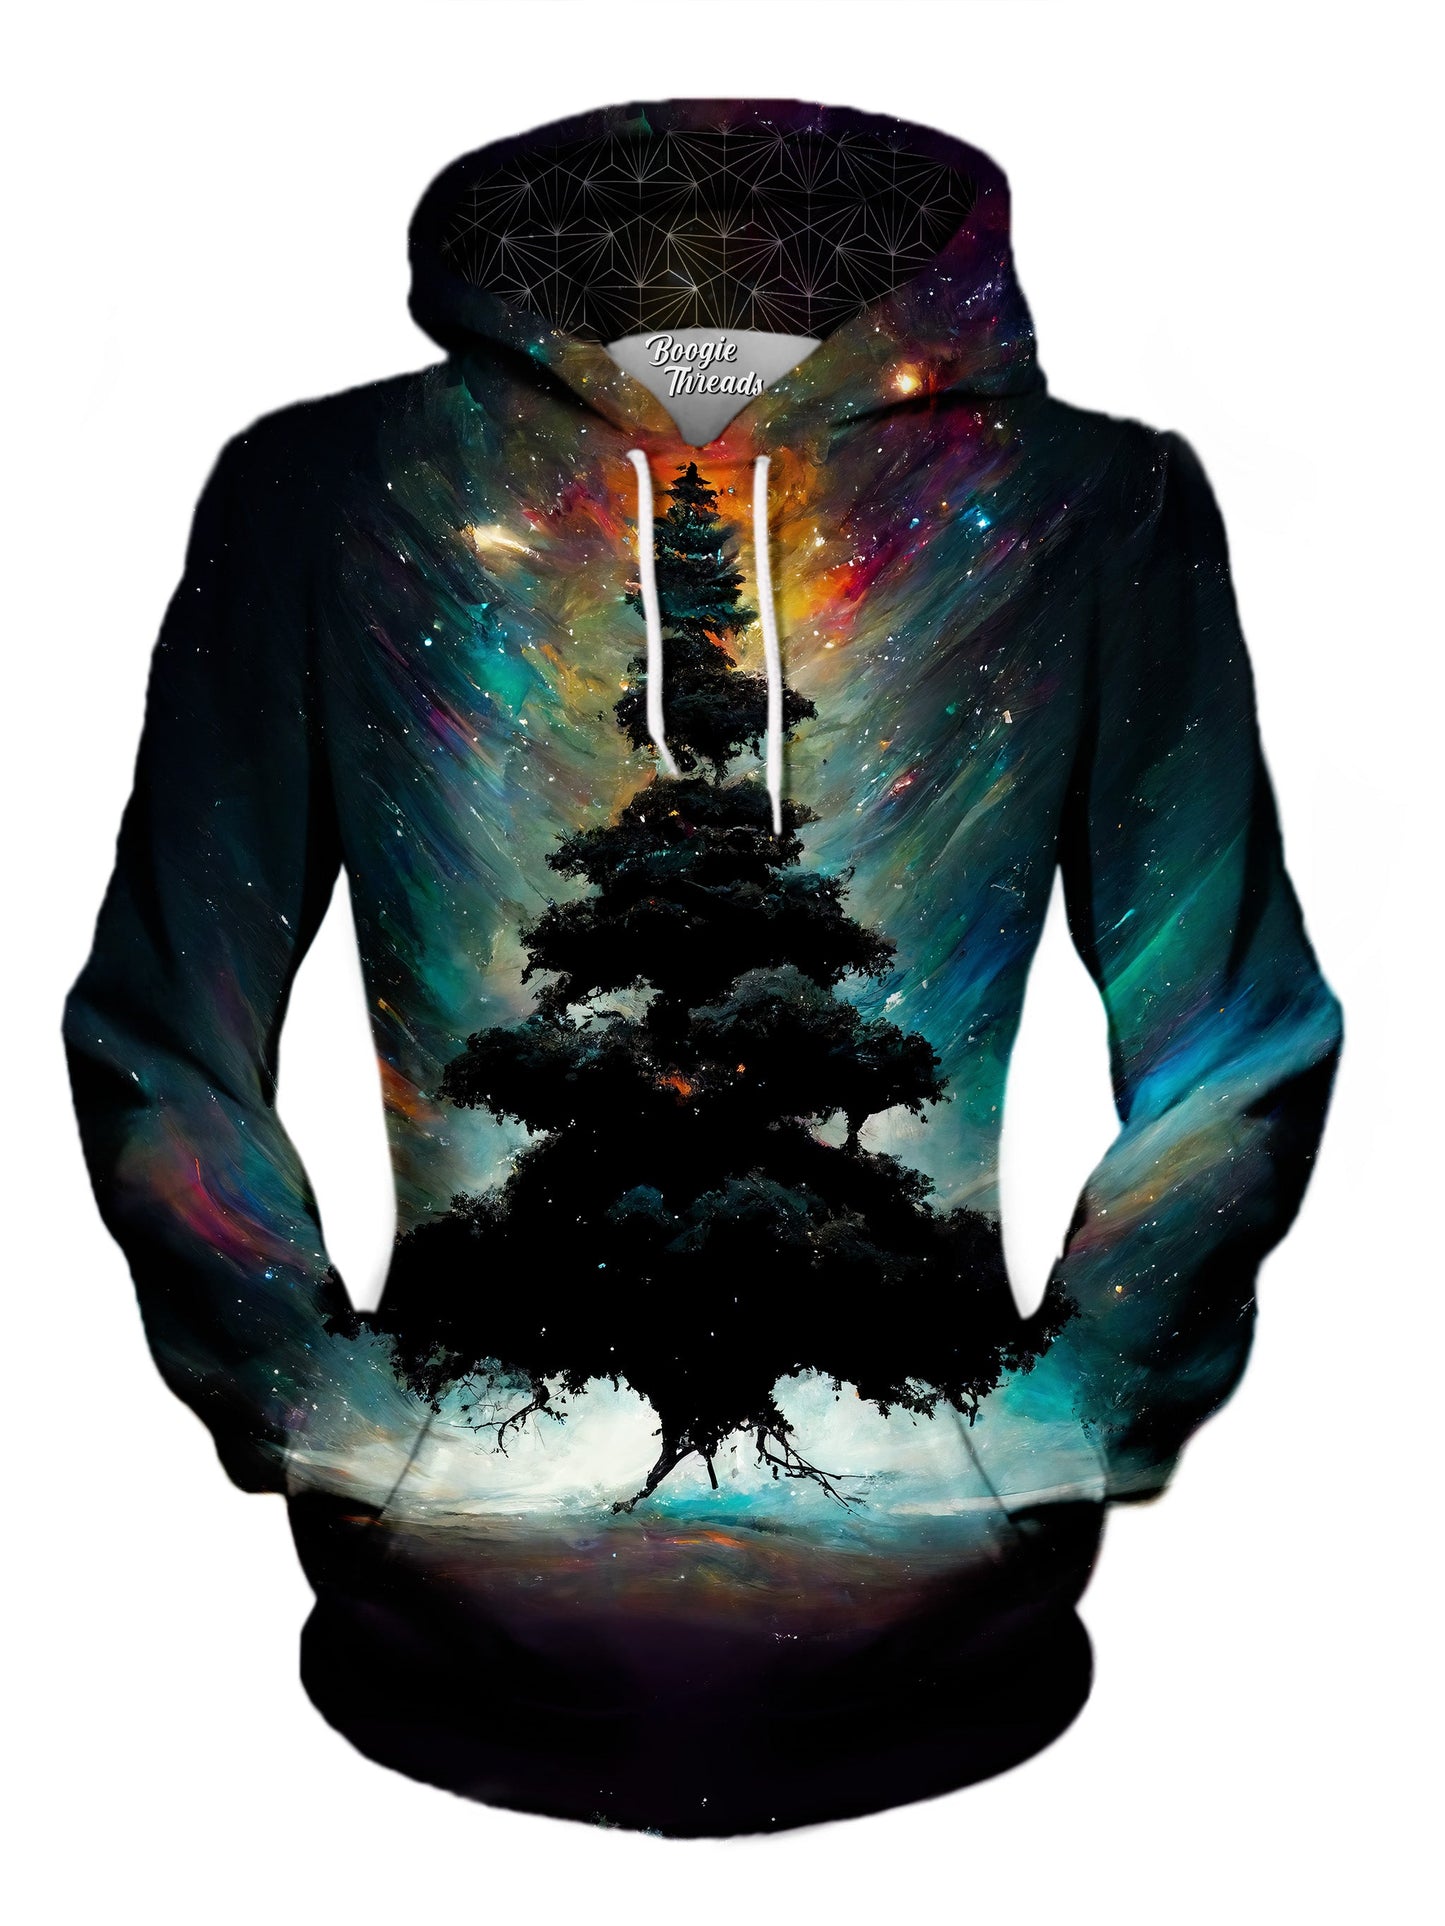 festival styled all over hoodie print, bright colored galaxy with dark tree